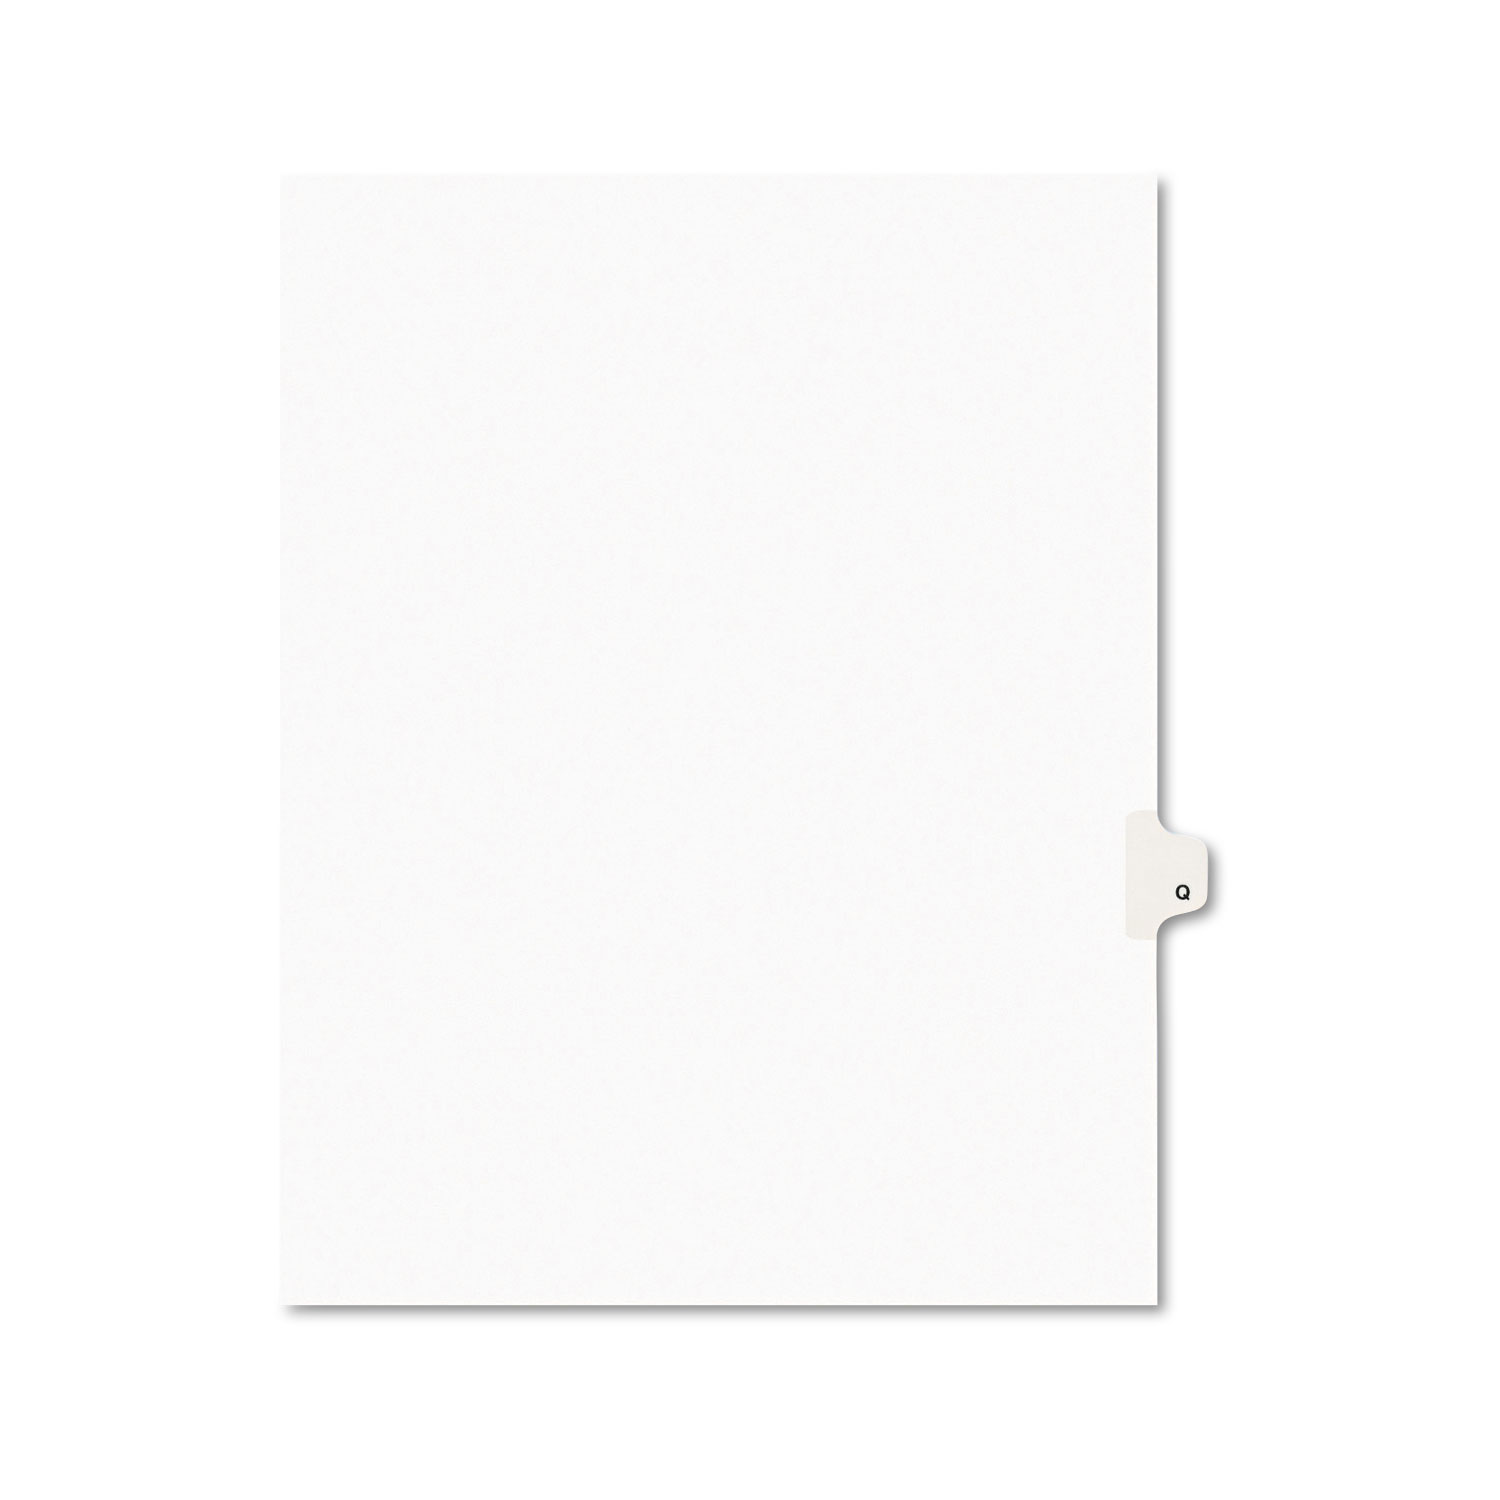  Avery 01417 Preprinted Legal Exhibit Side Tab Index Dividers, Avery Style, 26-Tab, Q, 11 x 8.5, White, 25/Pack (AVE01417) 